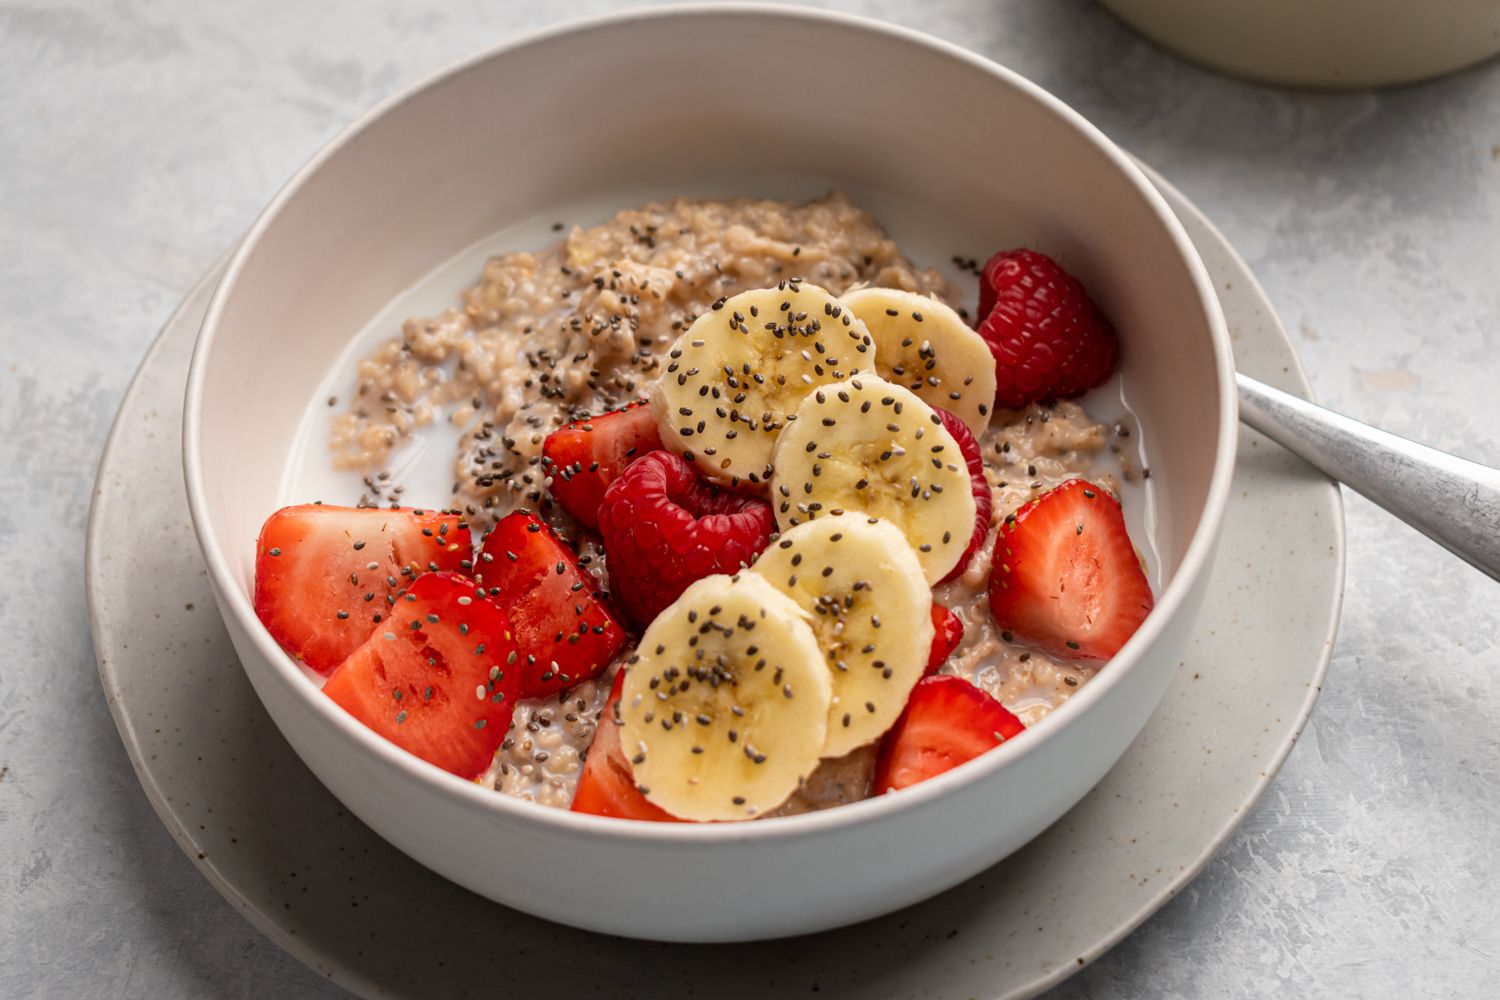 Steel cut oatmeal cooked in the slow cooker and served with milk, fresh berries, bananas, and chia seeds in a bowl.